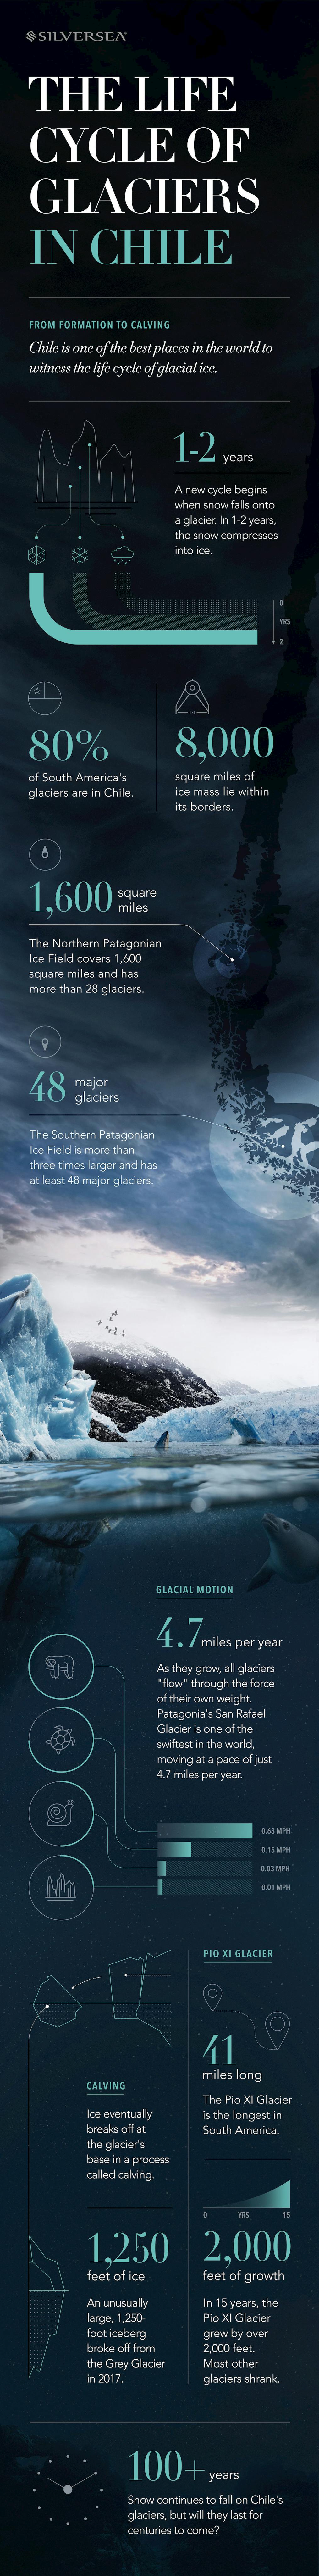 Learn about the stages of a glacier with this infographic.